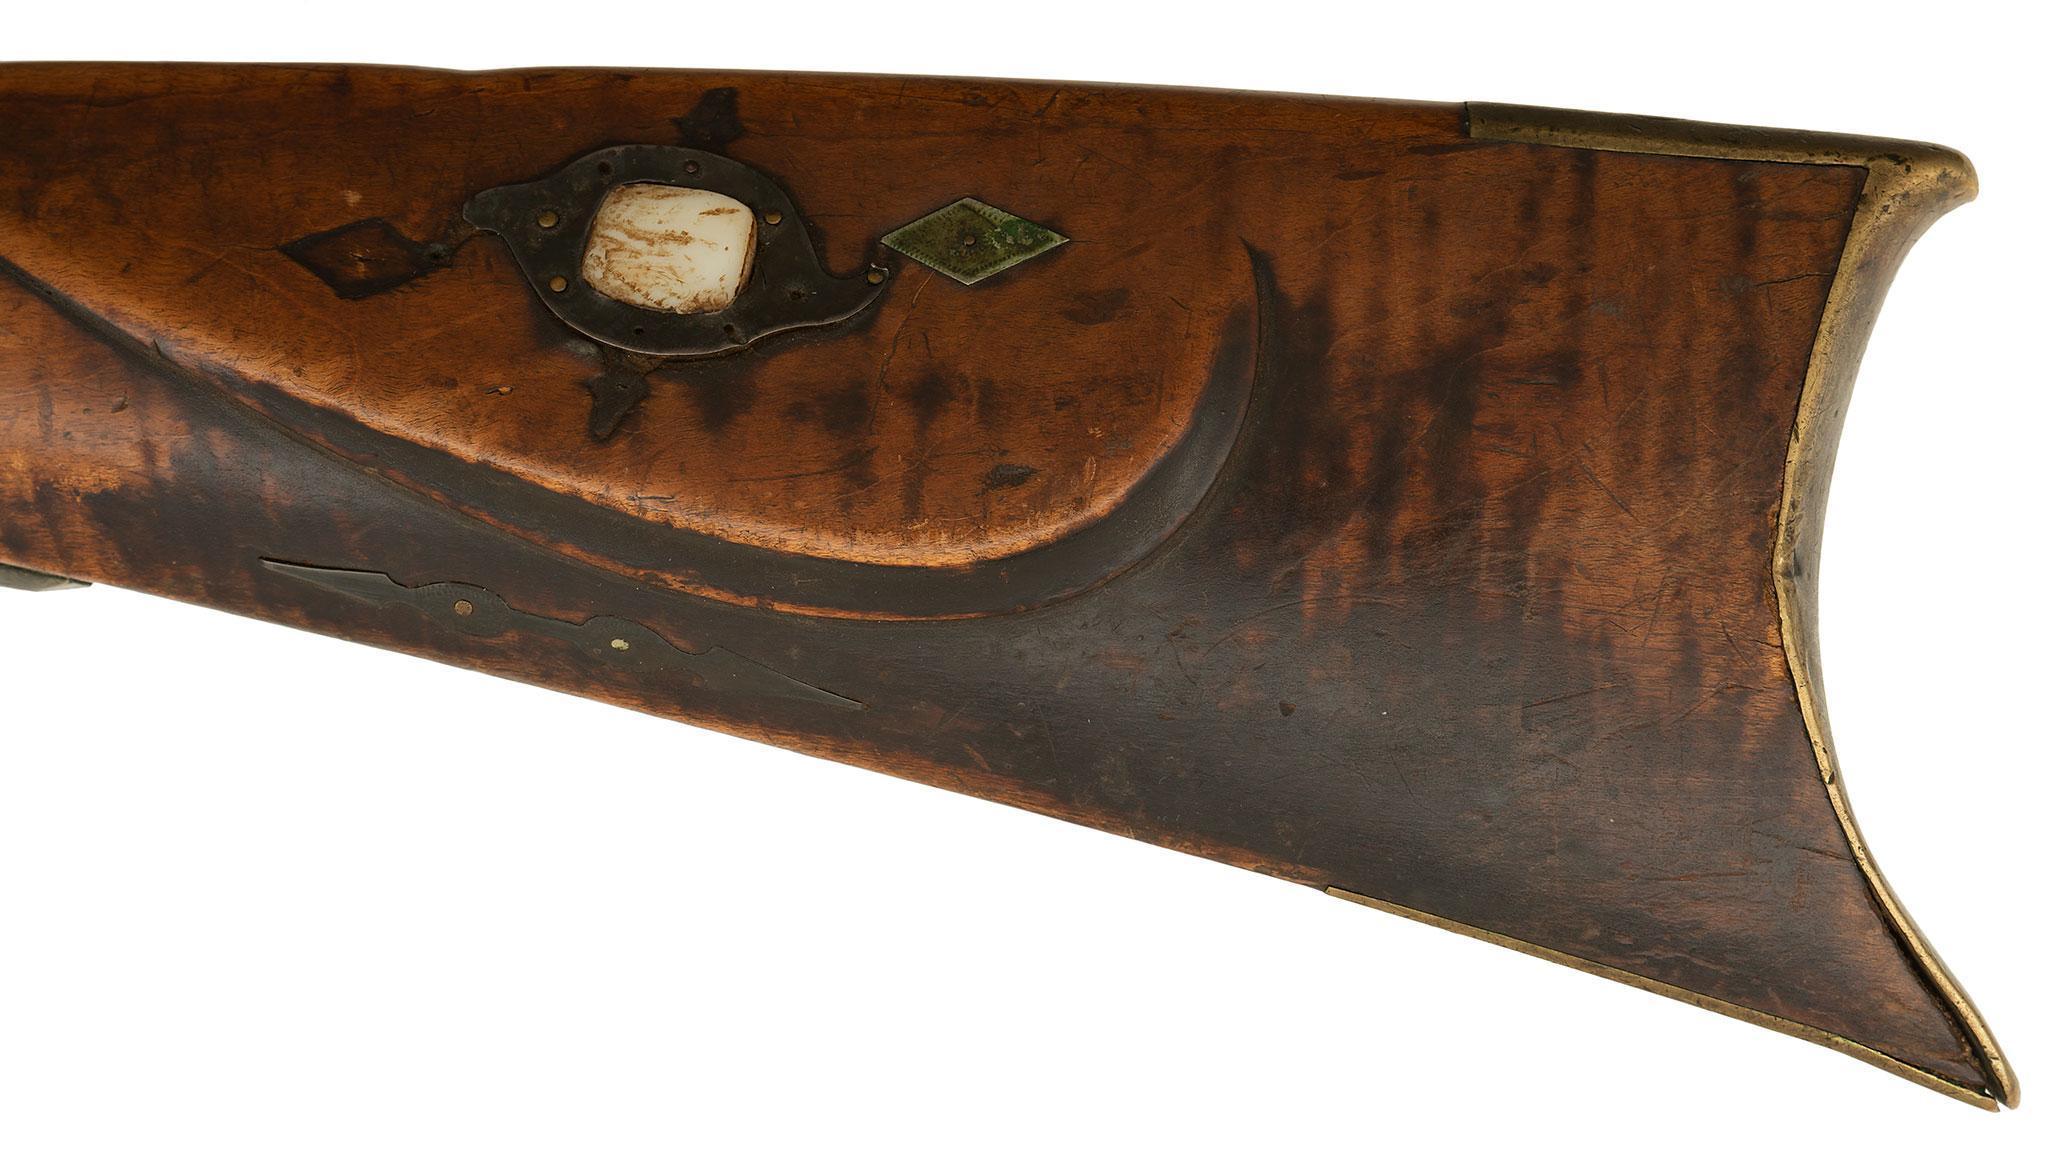 Percussion Half Stock Plains Style Rifle By John Smith